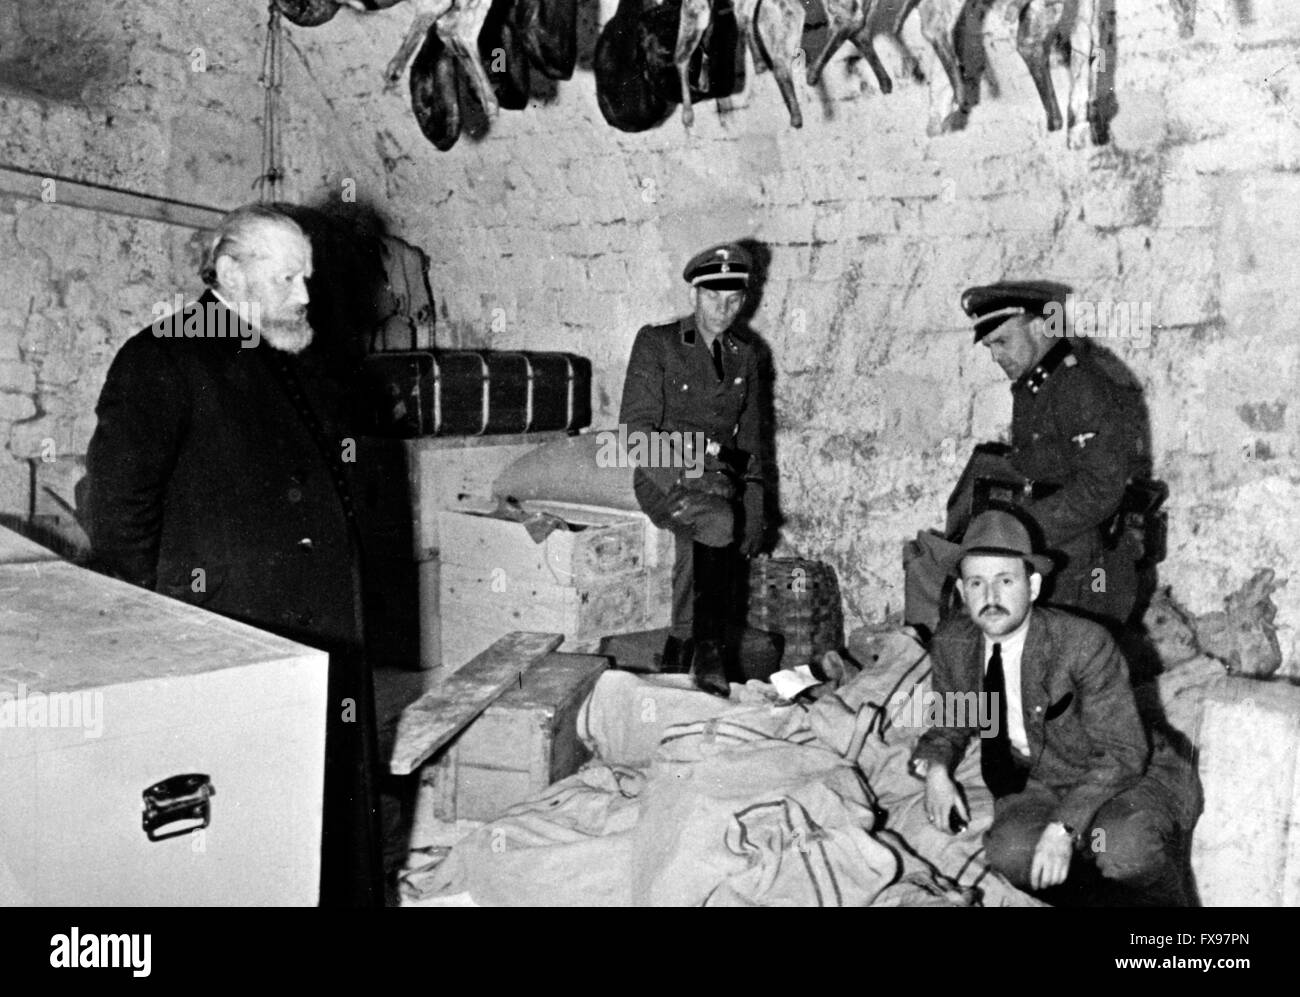 The Nazi propaganda image depicts member of the German Gestapo with a part of the Serbian treasury in the Ostrog monastery (today in Montenegro) in April 1941. Fotoarchiv für Zeitgeschichtee - NO WIRE SERVICE - Stock Photo